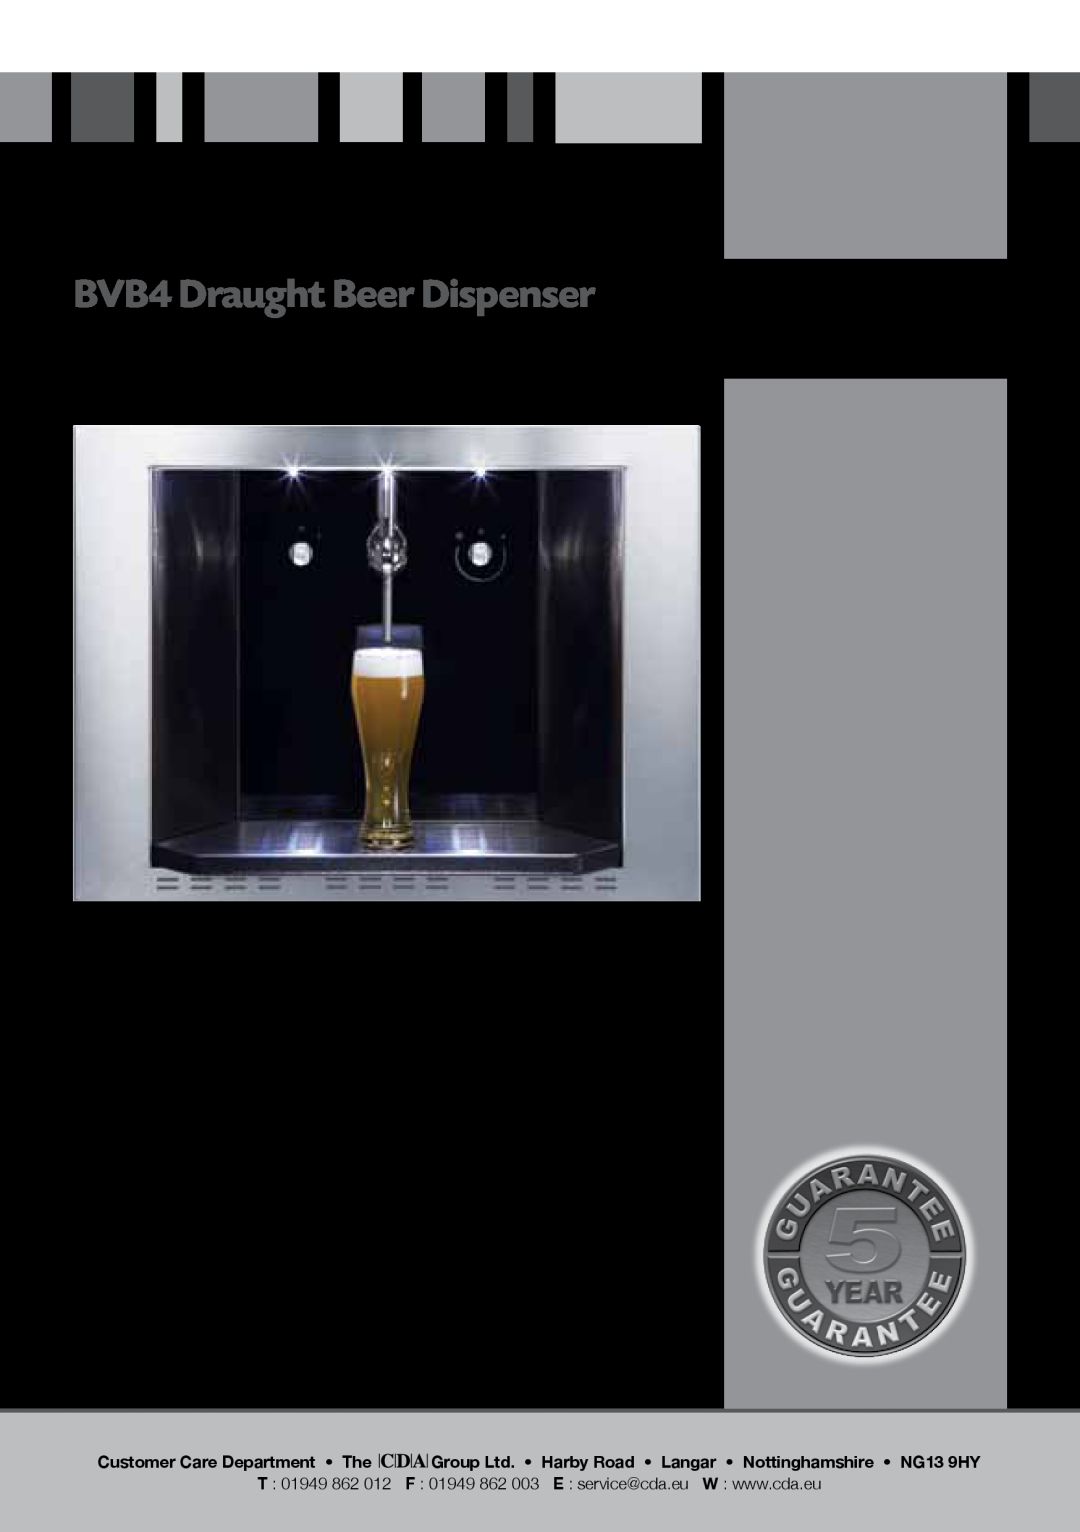 CDA manual BVB4 Draught Beer Dispenser, Manual for Installation, Use and Maintenance, Customer Care Department The 